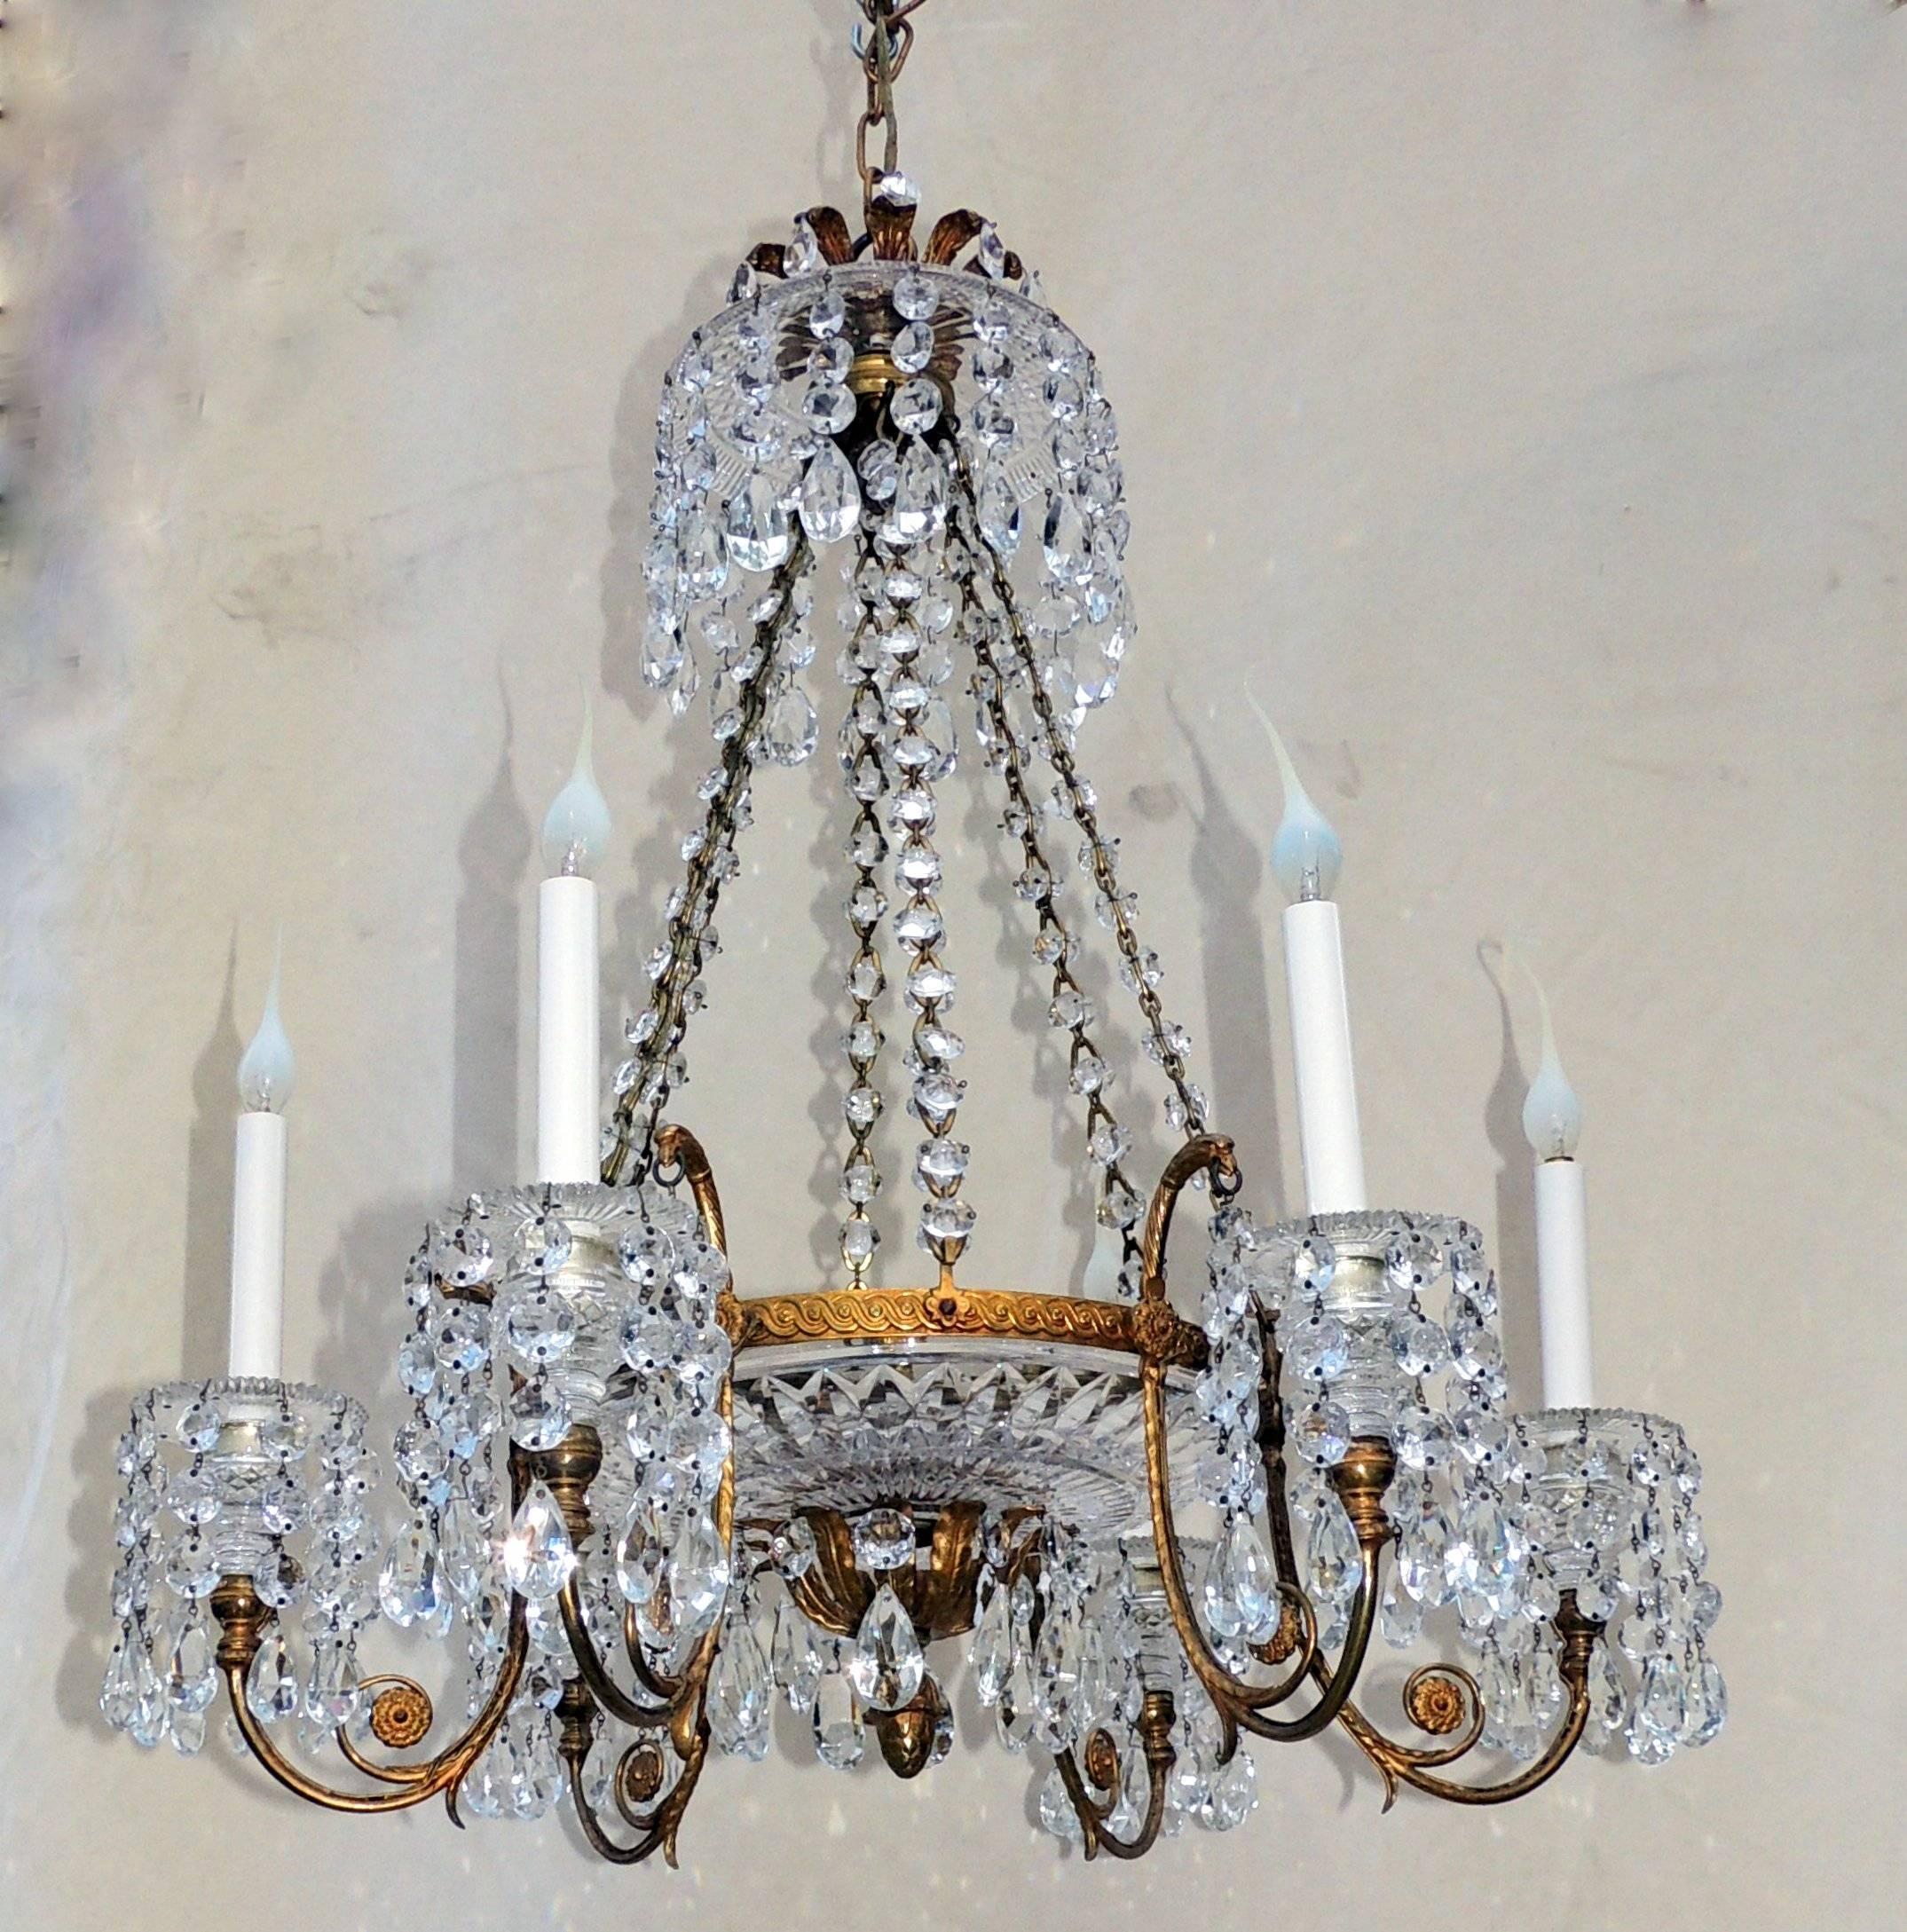 Doré bronze six-light and cut crystal bowl neoclassical chandelier with crystal chain. A timeless design of crystal bobeches with cascading crystal prism drops, intricate cut crystal bowls, beautiful doré bronze arms and frame finished with